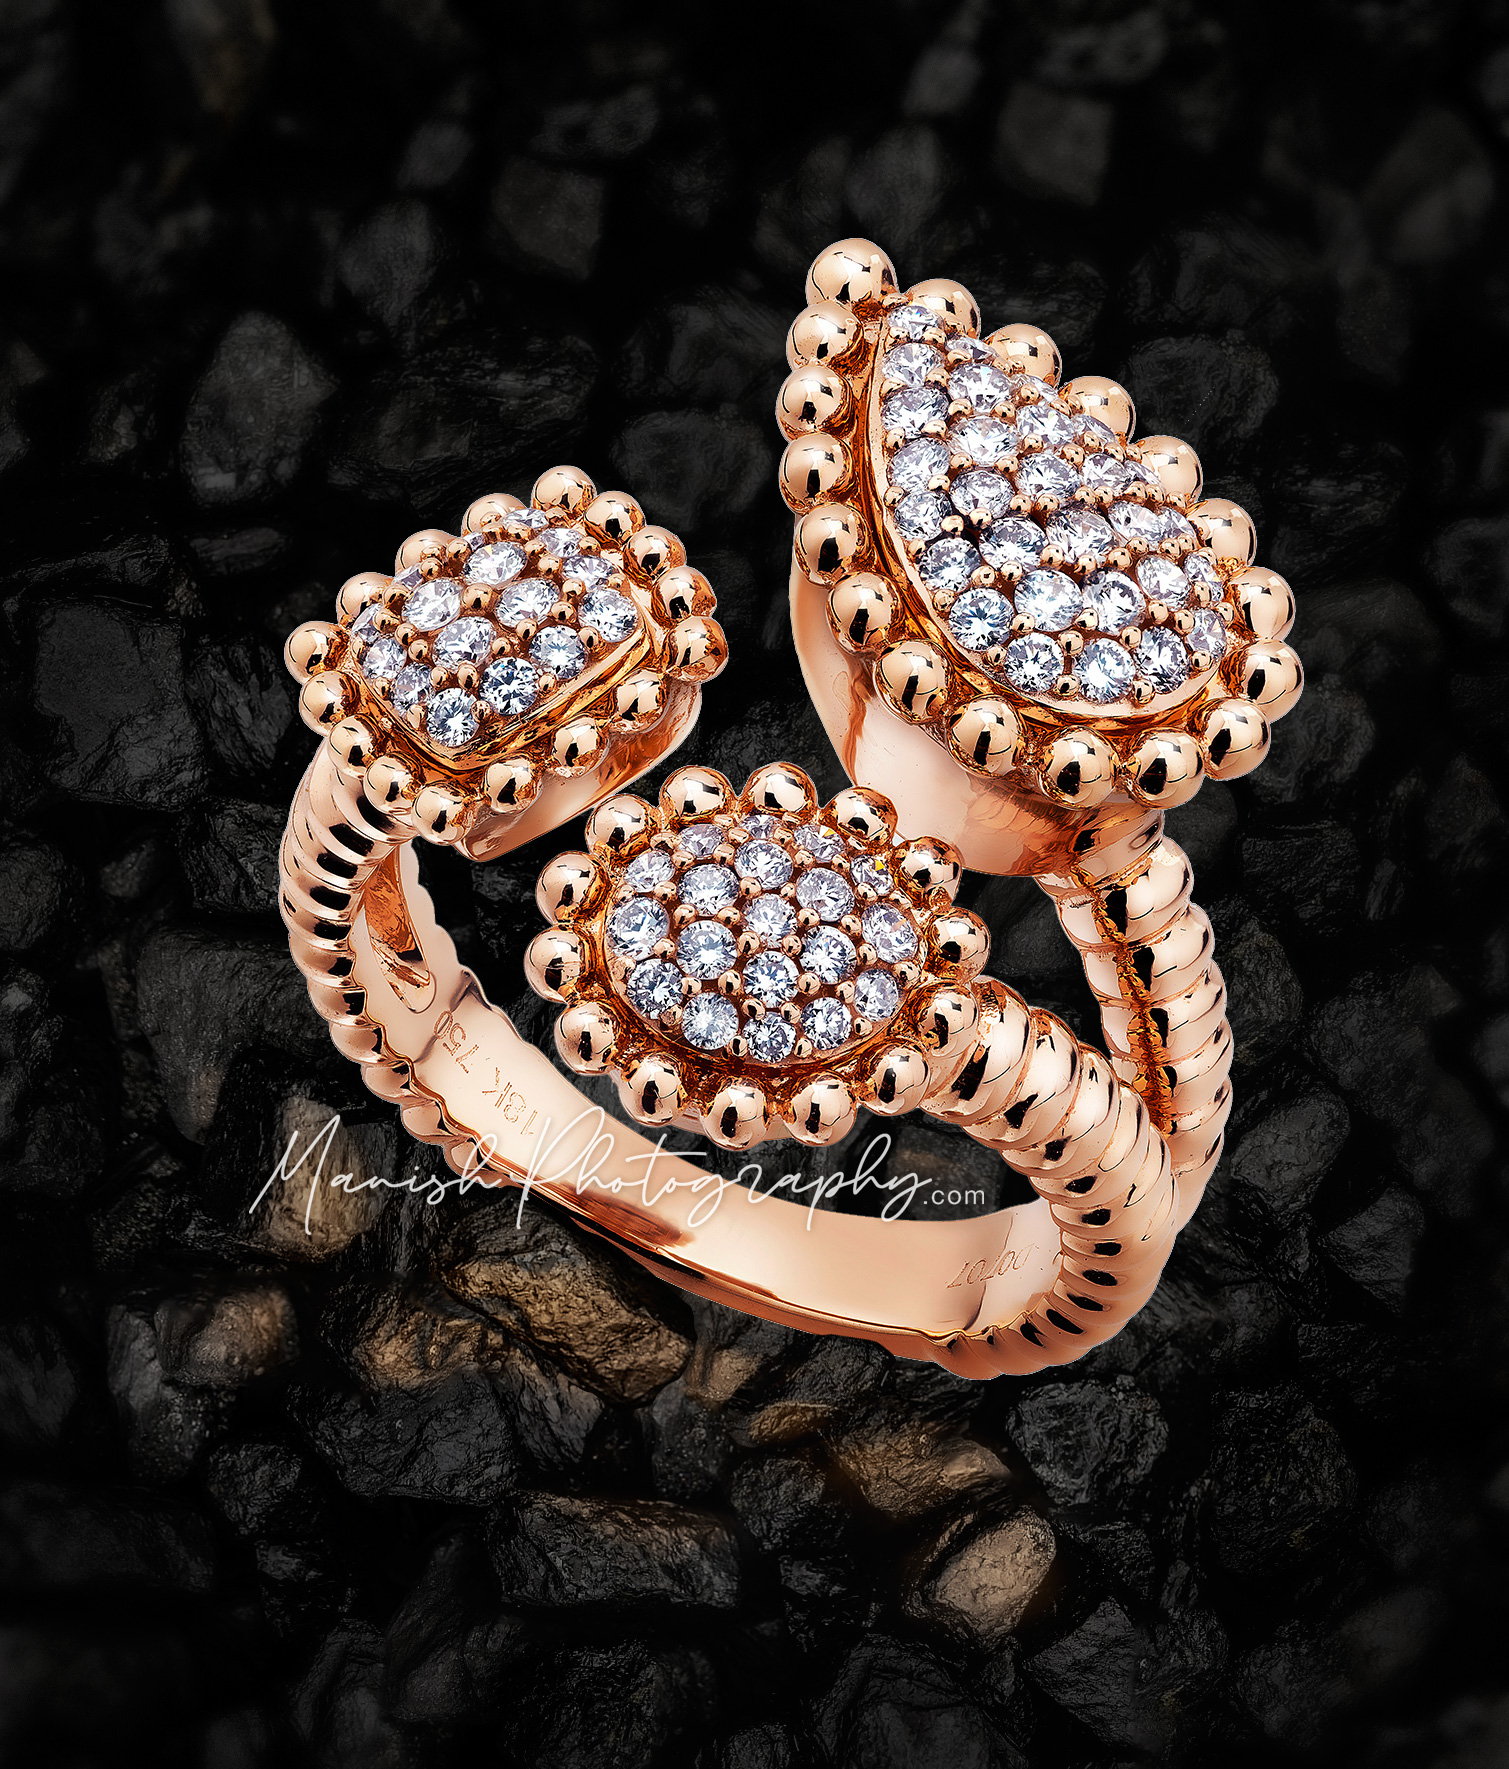 Rose gold and diamond ring jewellery mood shot 